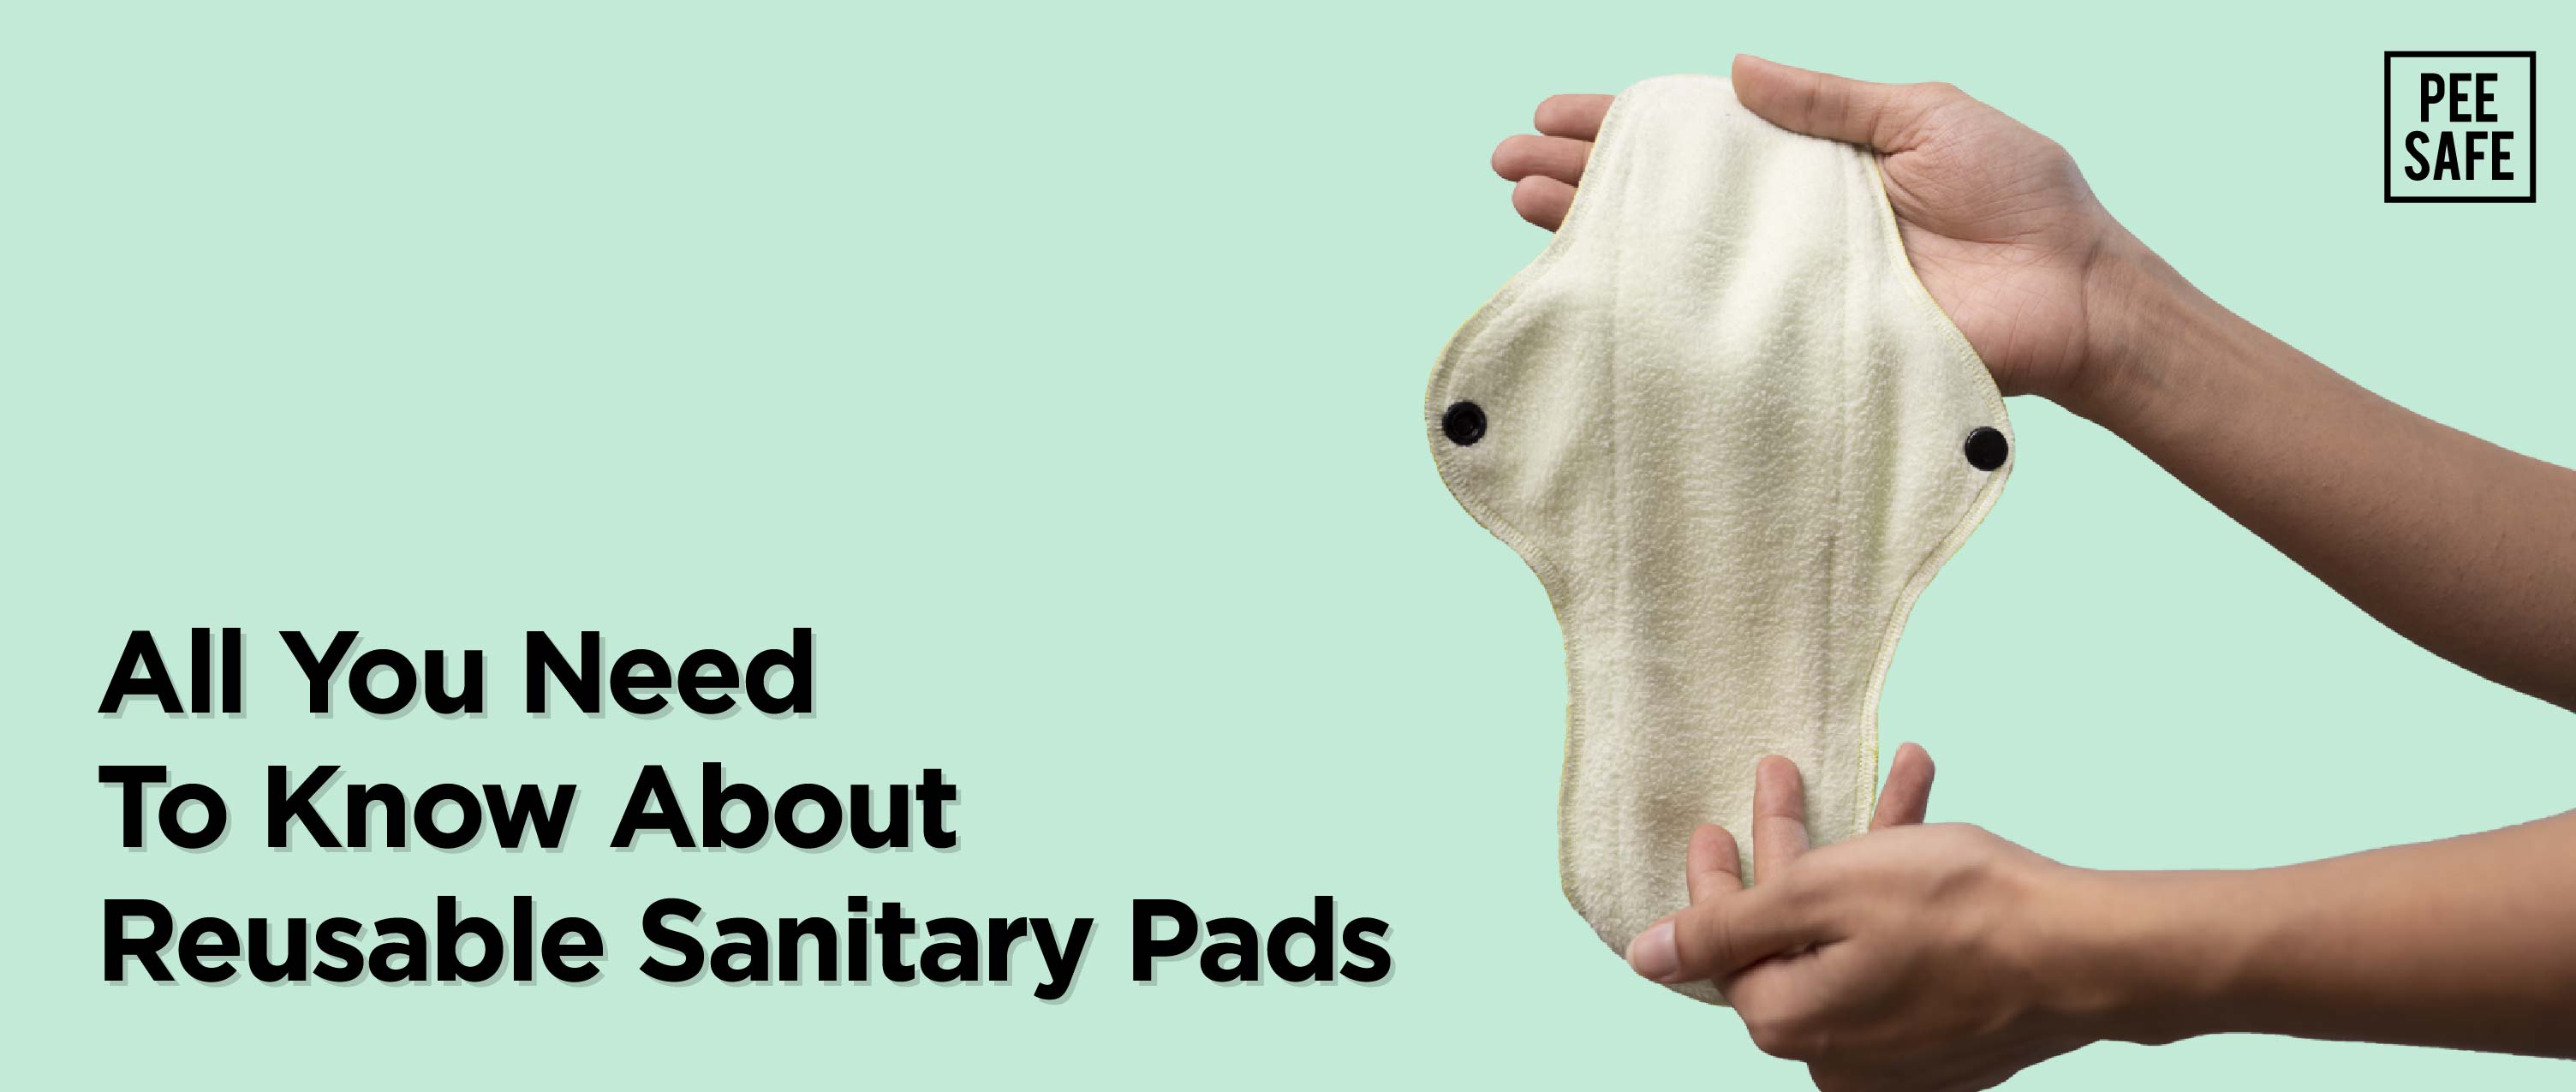 All You Need To Know About Reusable Sanitary Pads